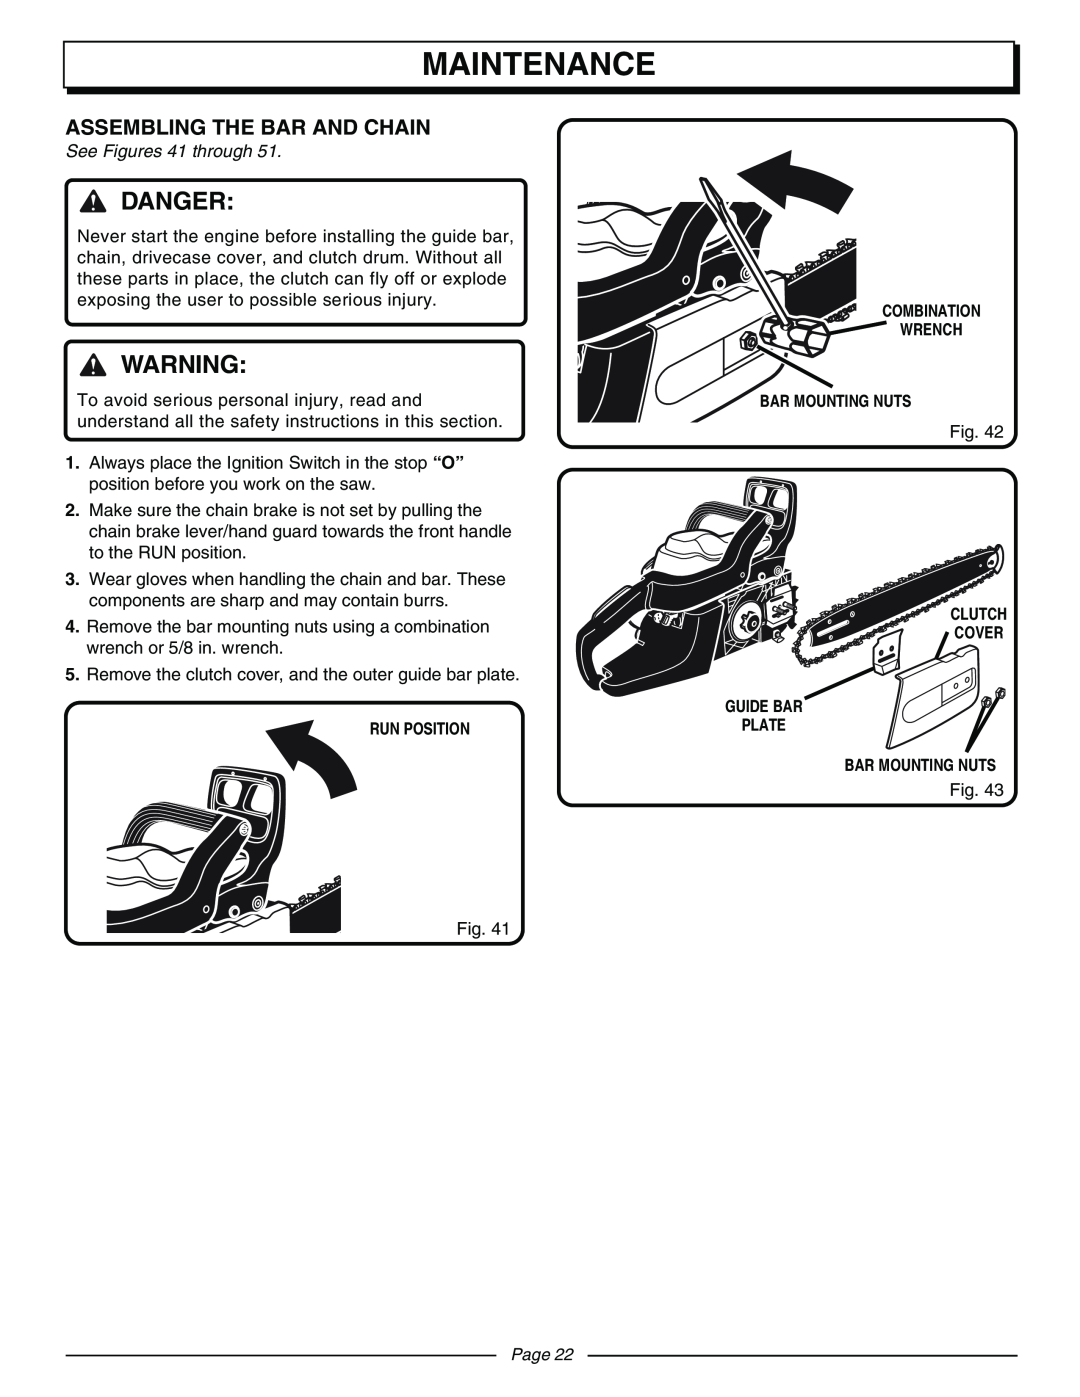 Homelite UT10570 manual Maintenance, Danger, Assembling The Bar And Chain, See Figures 41 through, Page 